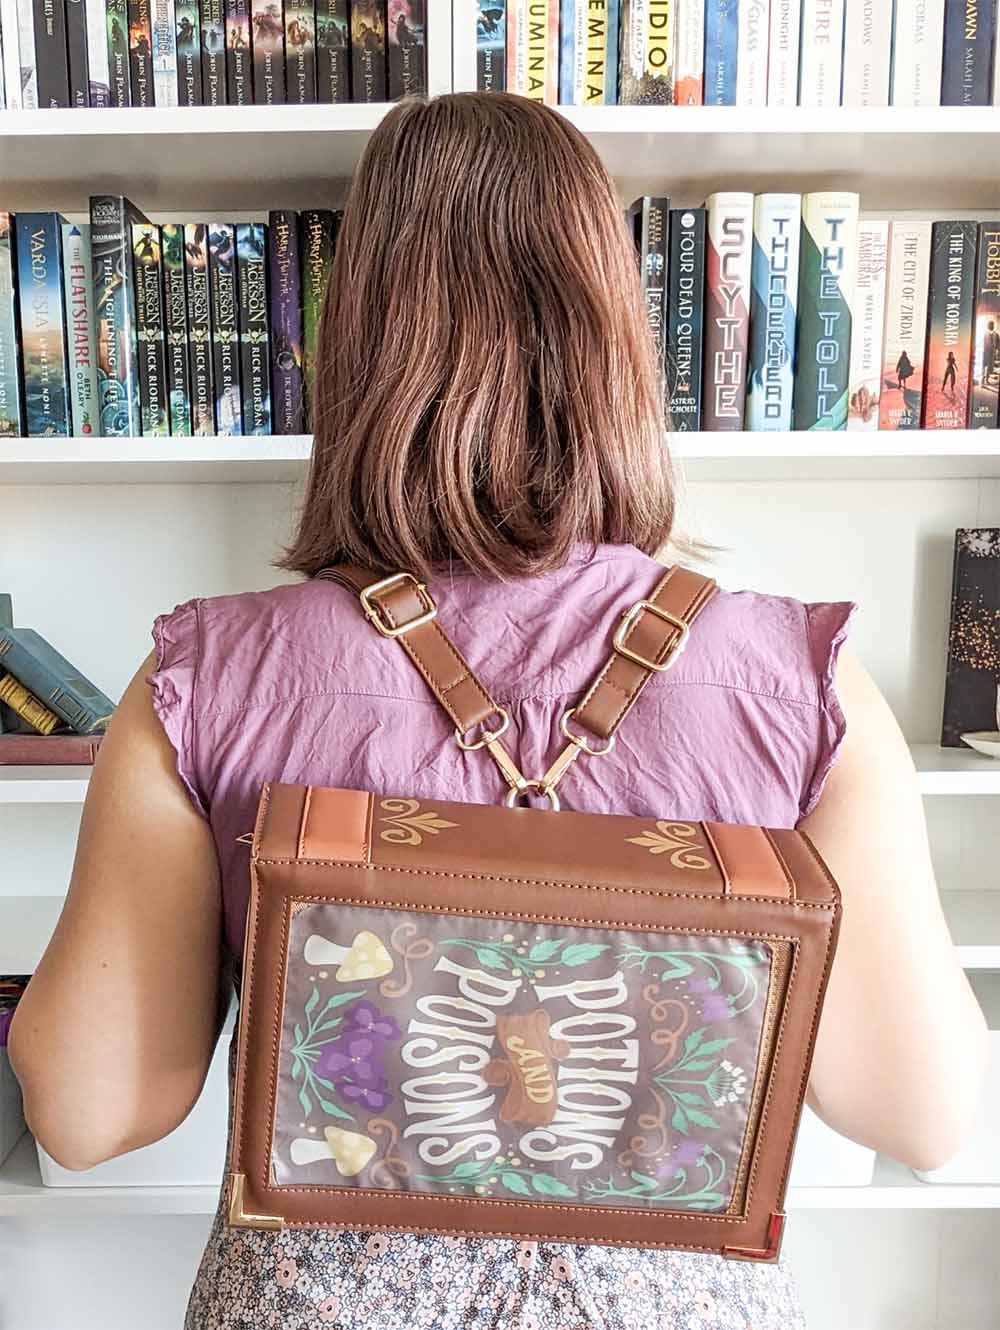 Potions Poisons Dark Academia Book Ita Backpack